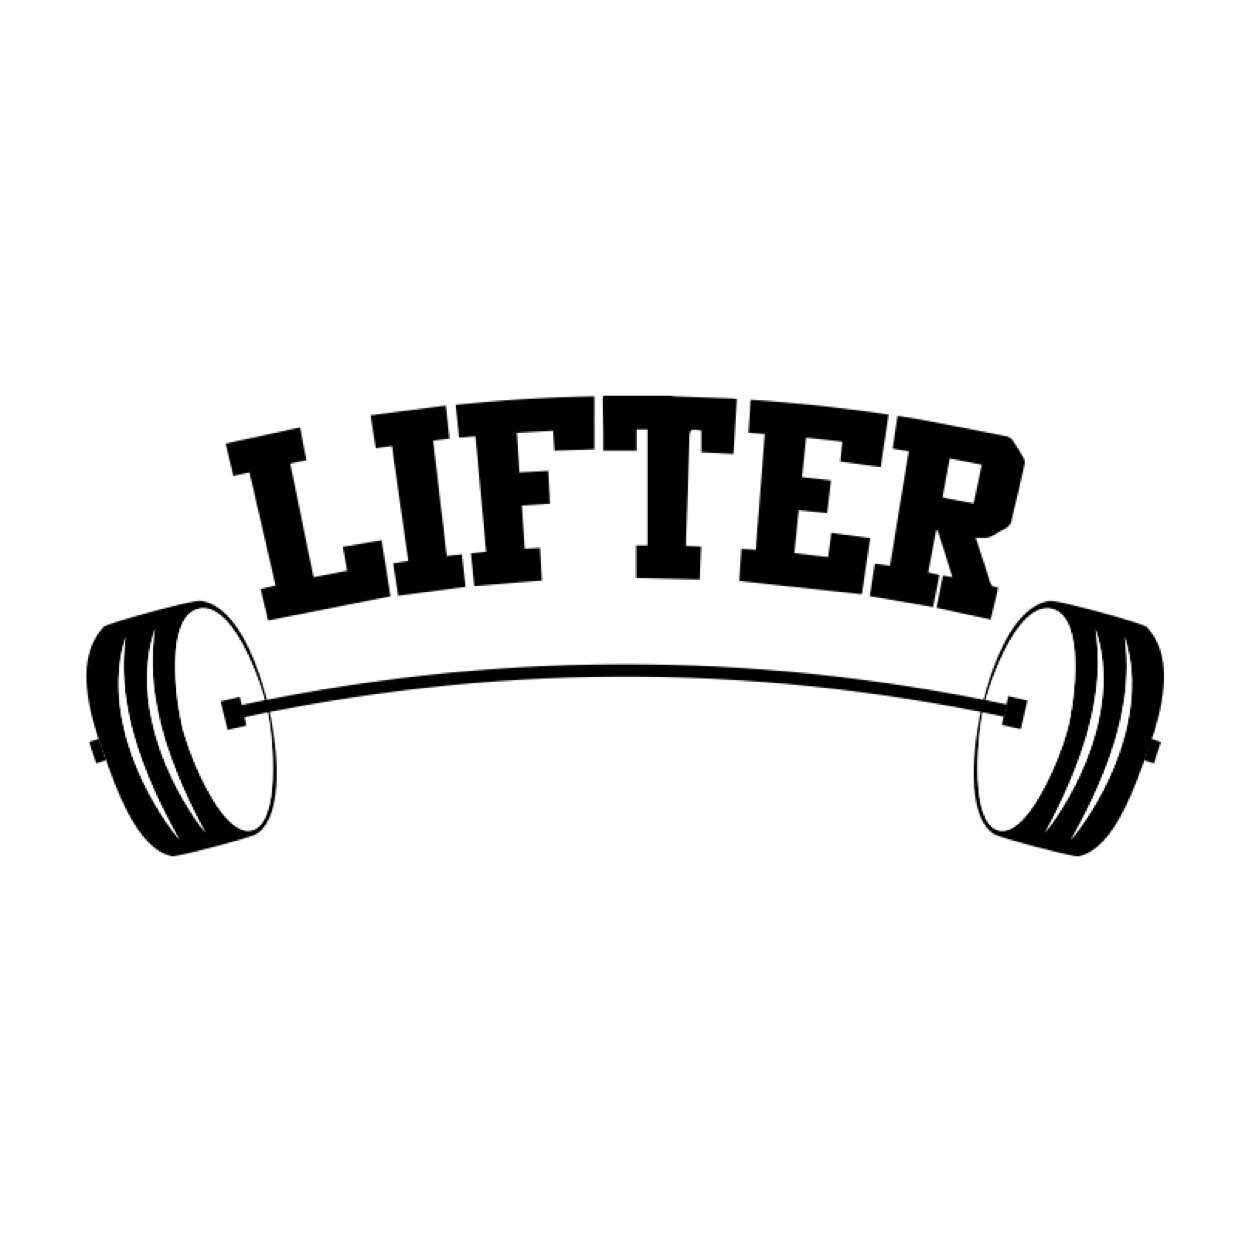 Join the Working Class #LIFTER movement⚒